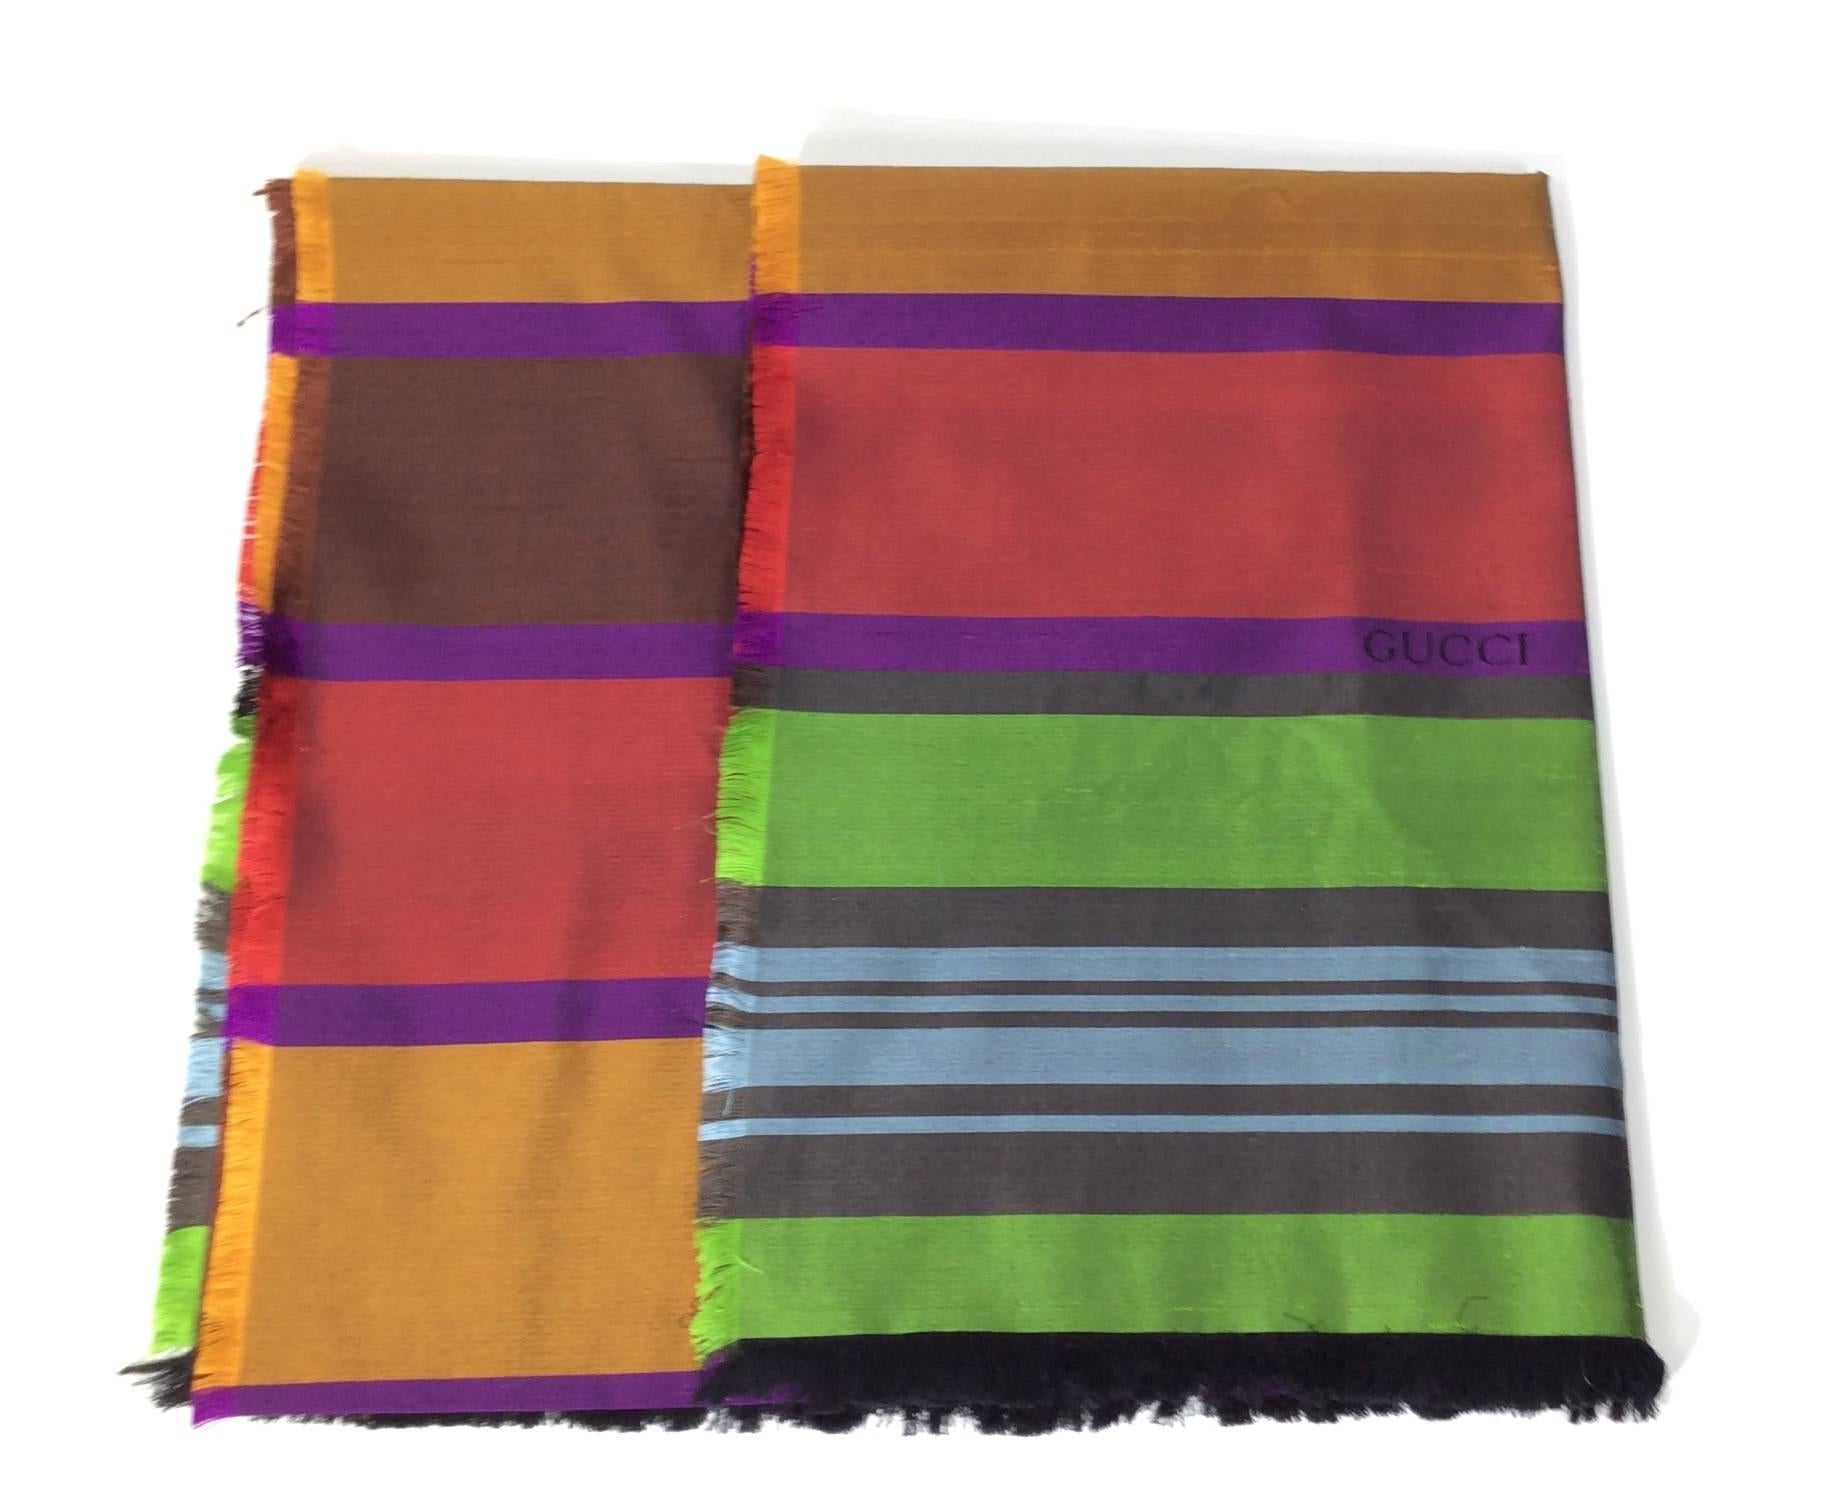 Multicolor Striped Woven Scarf
64''x28'' dimensions
Includes fringe on scarf edges
Gucci name woven into alternating stripes
70% Cotton, 30% Silk